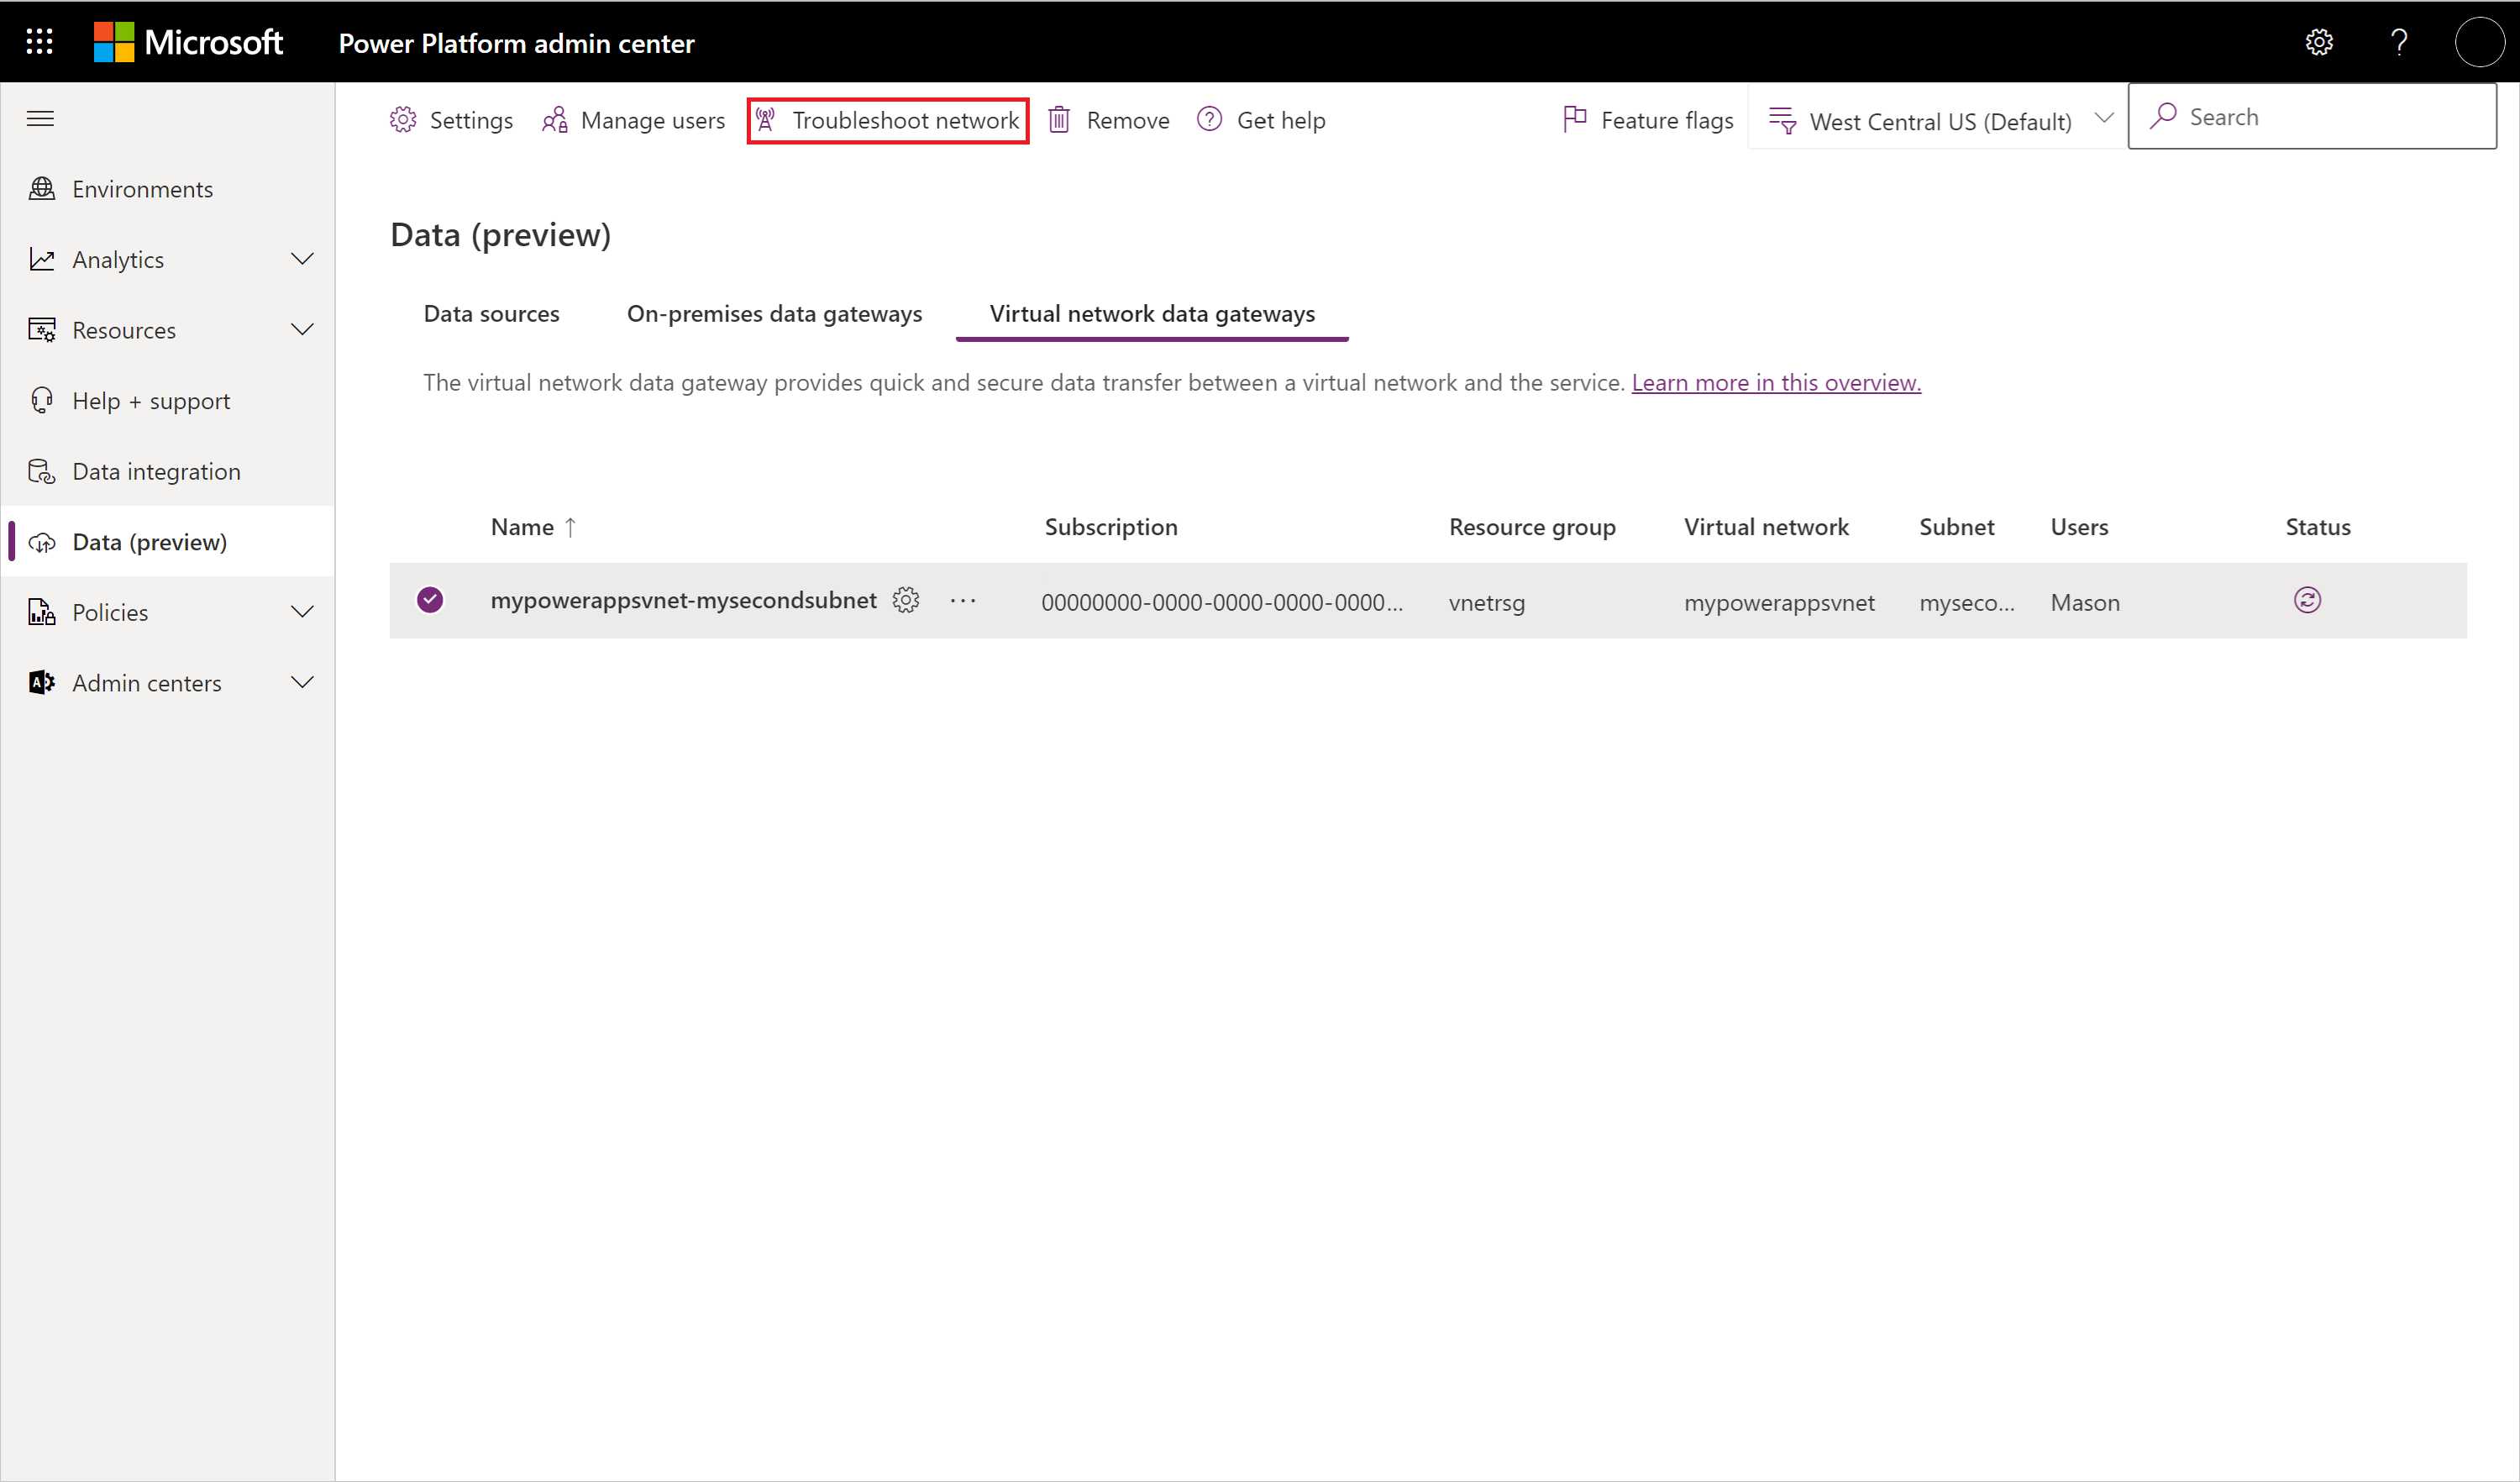 Image of the Power Query admin center with Data (preview) menu item open, a gateway selected, and the Troubleshoot network selection emphasized.](media/troubleshoot-data-gateway/troubleshoot-network.png)